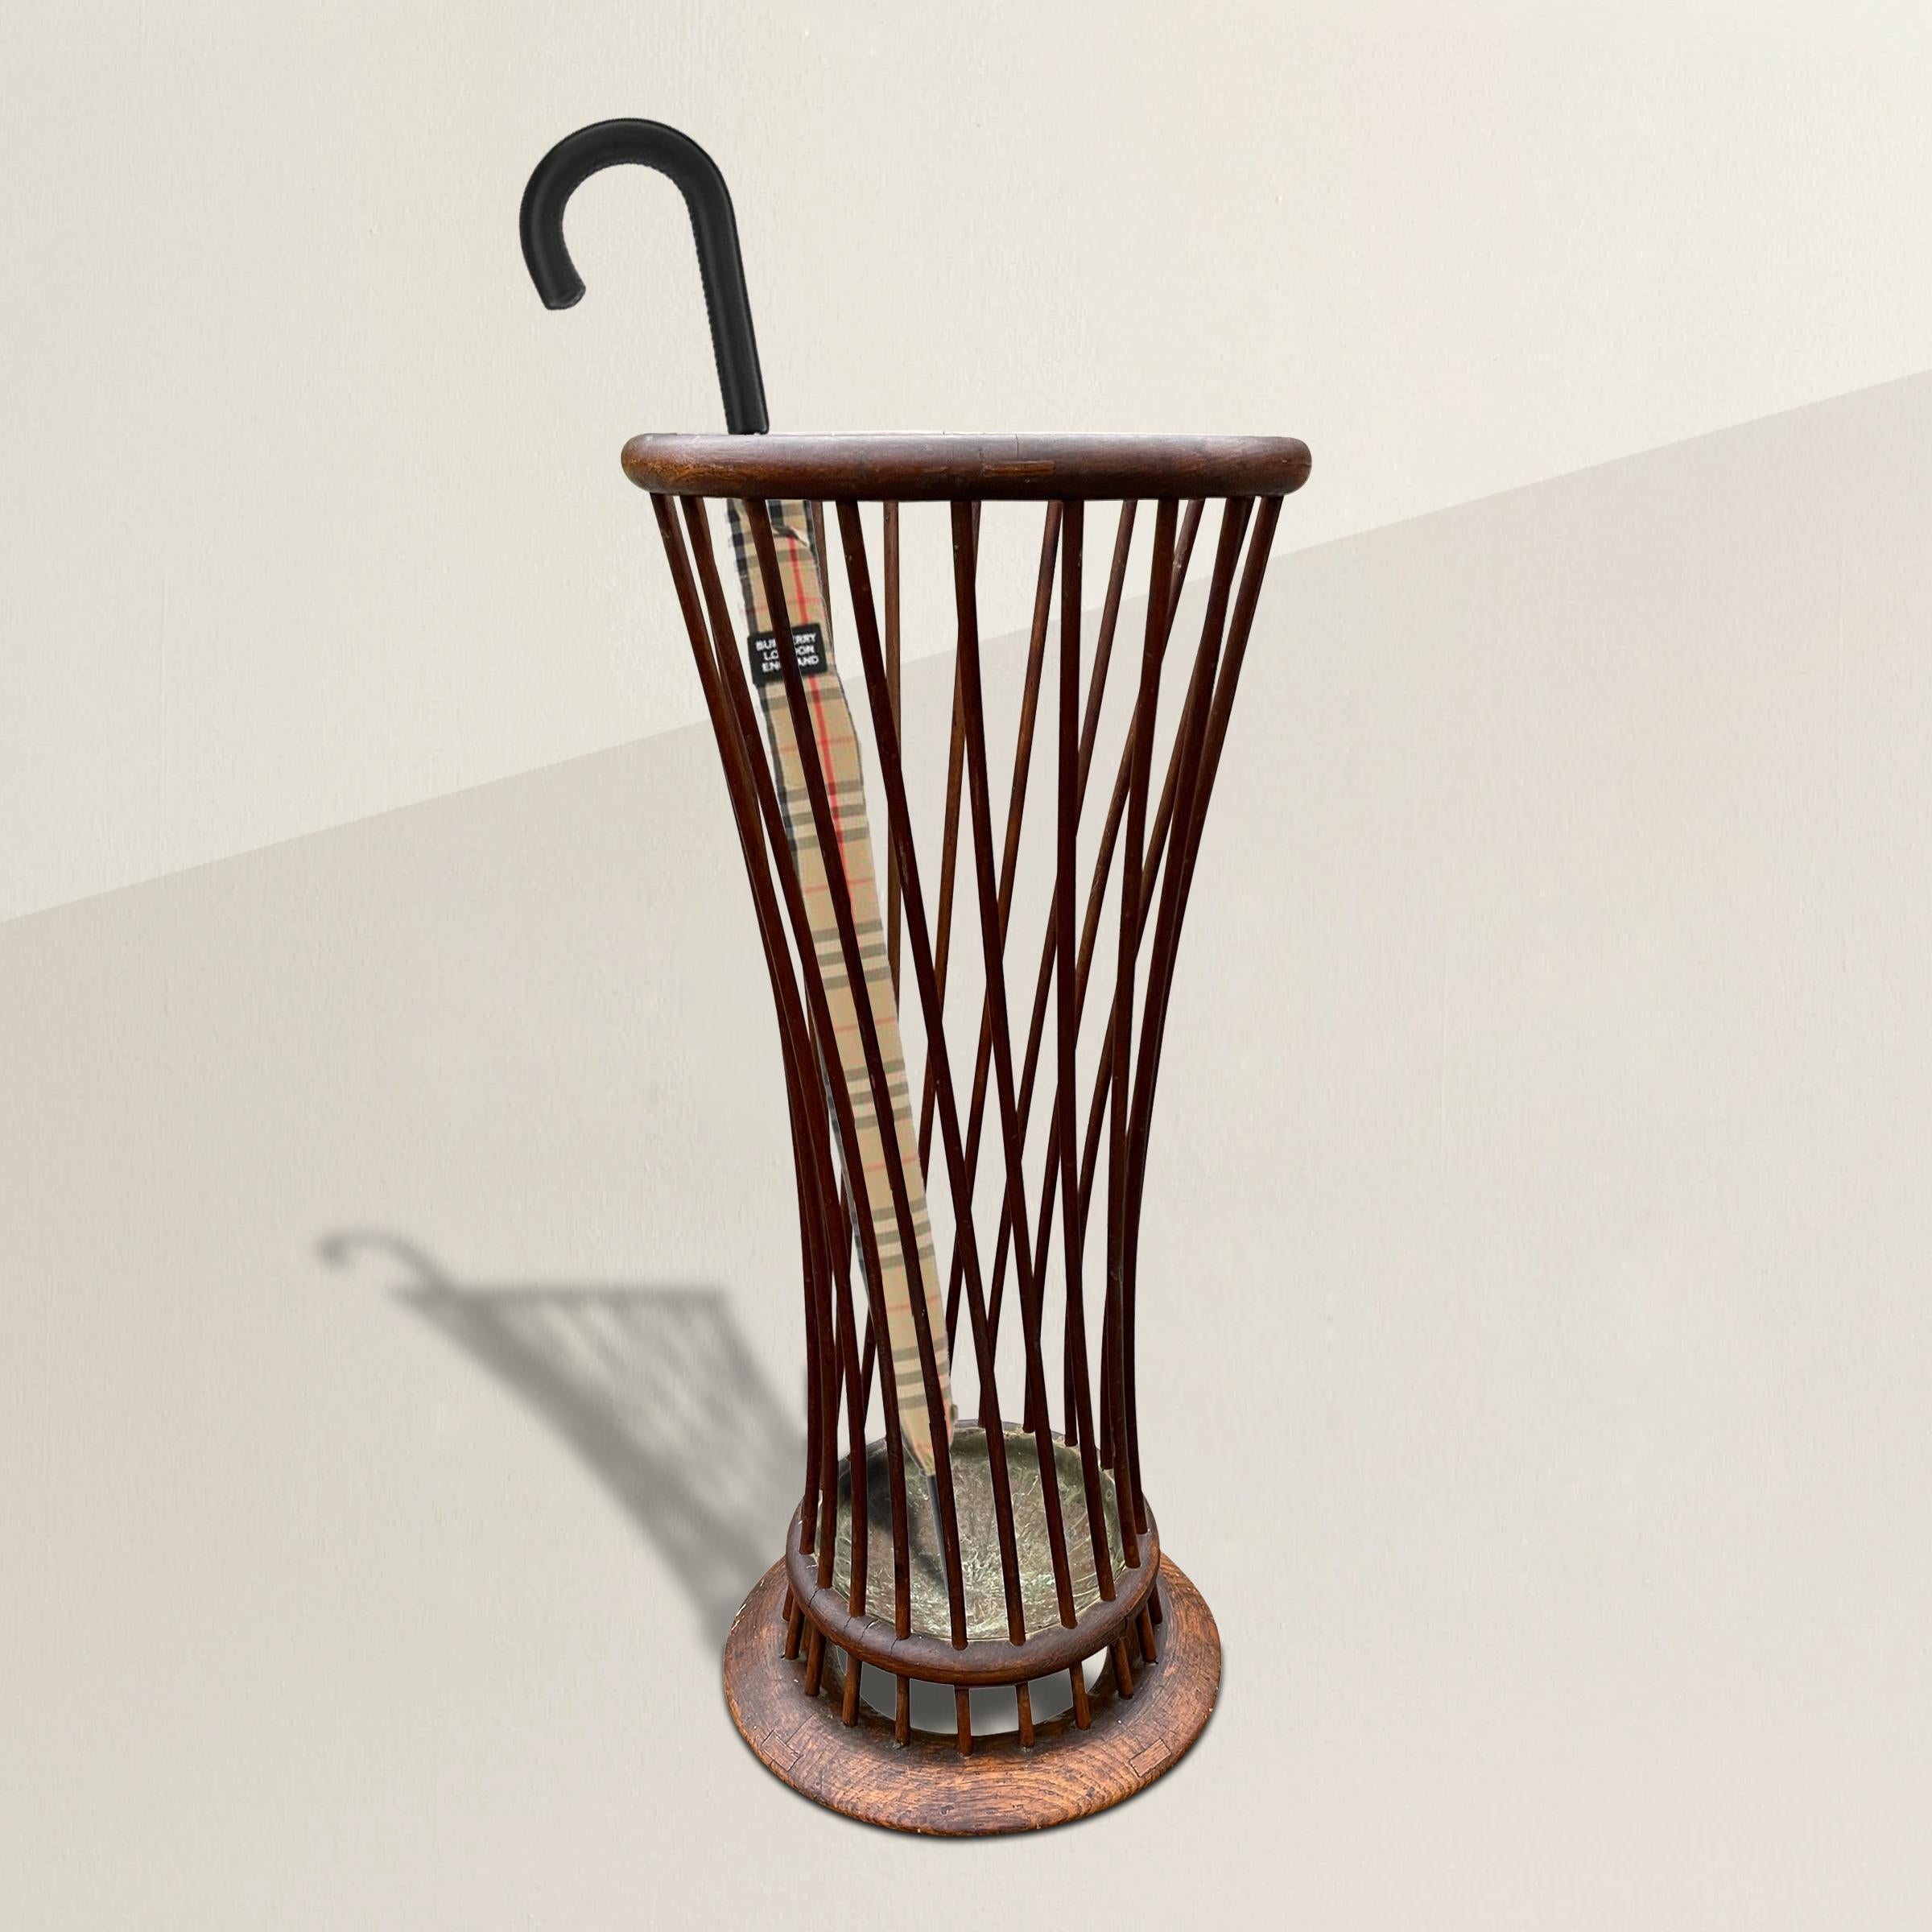 An incredibly chic early 20th century, possibly Viennese Secession, umbrella stand with a bentwood rim supported by multiple twisting spindles, a copper tray, and a bentwood foot. Perfect for umbrellas or walking sticks.